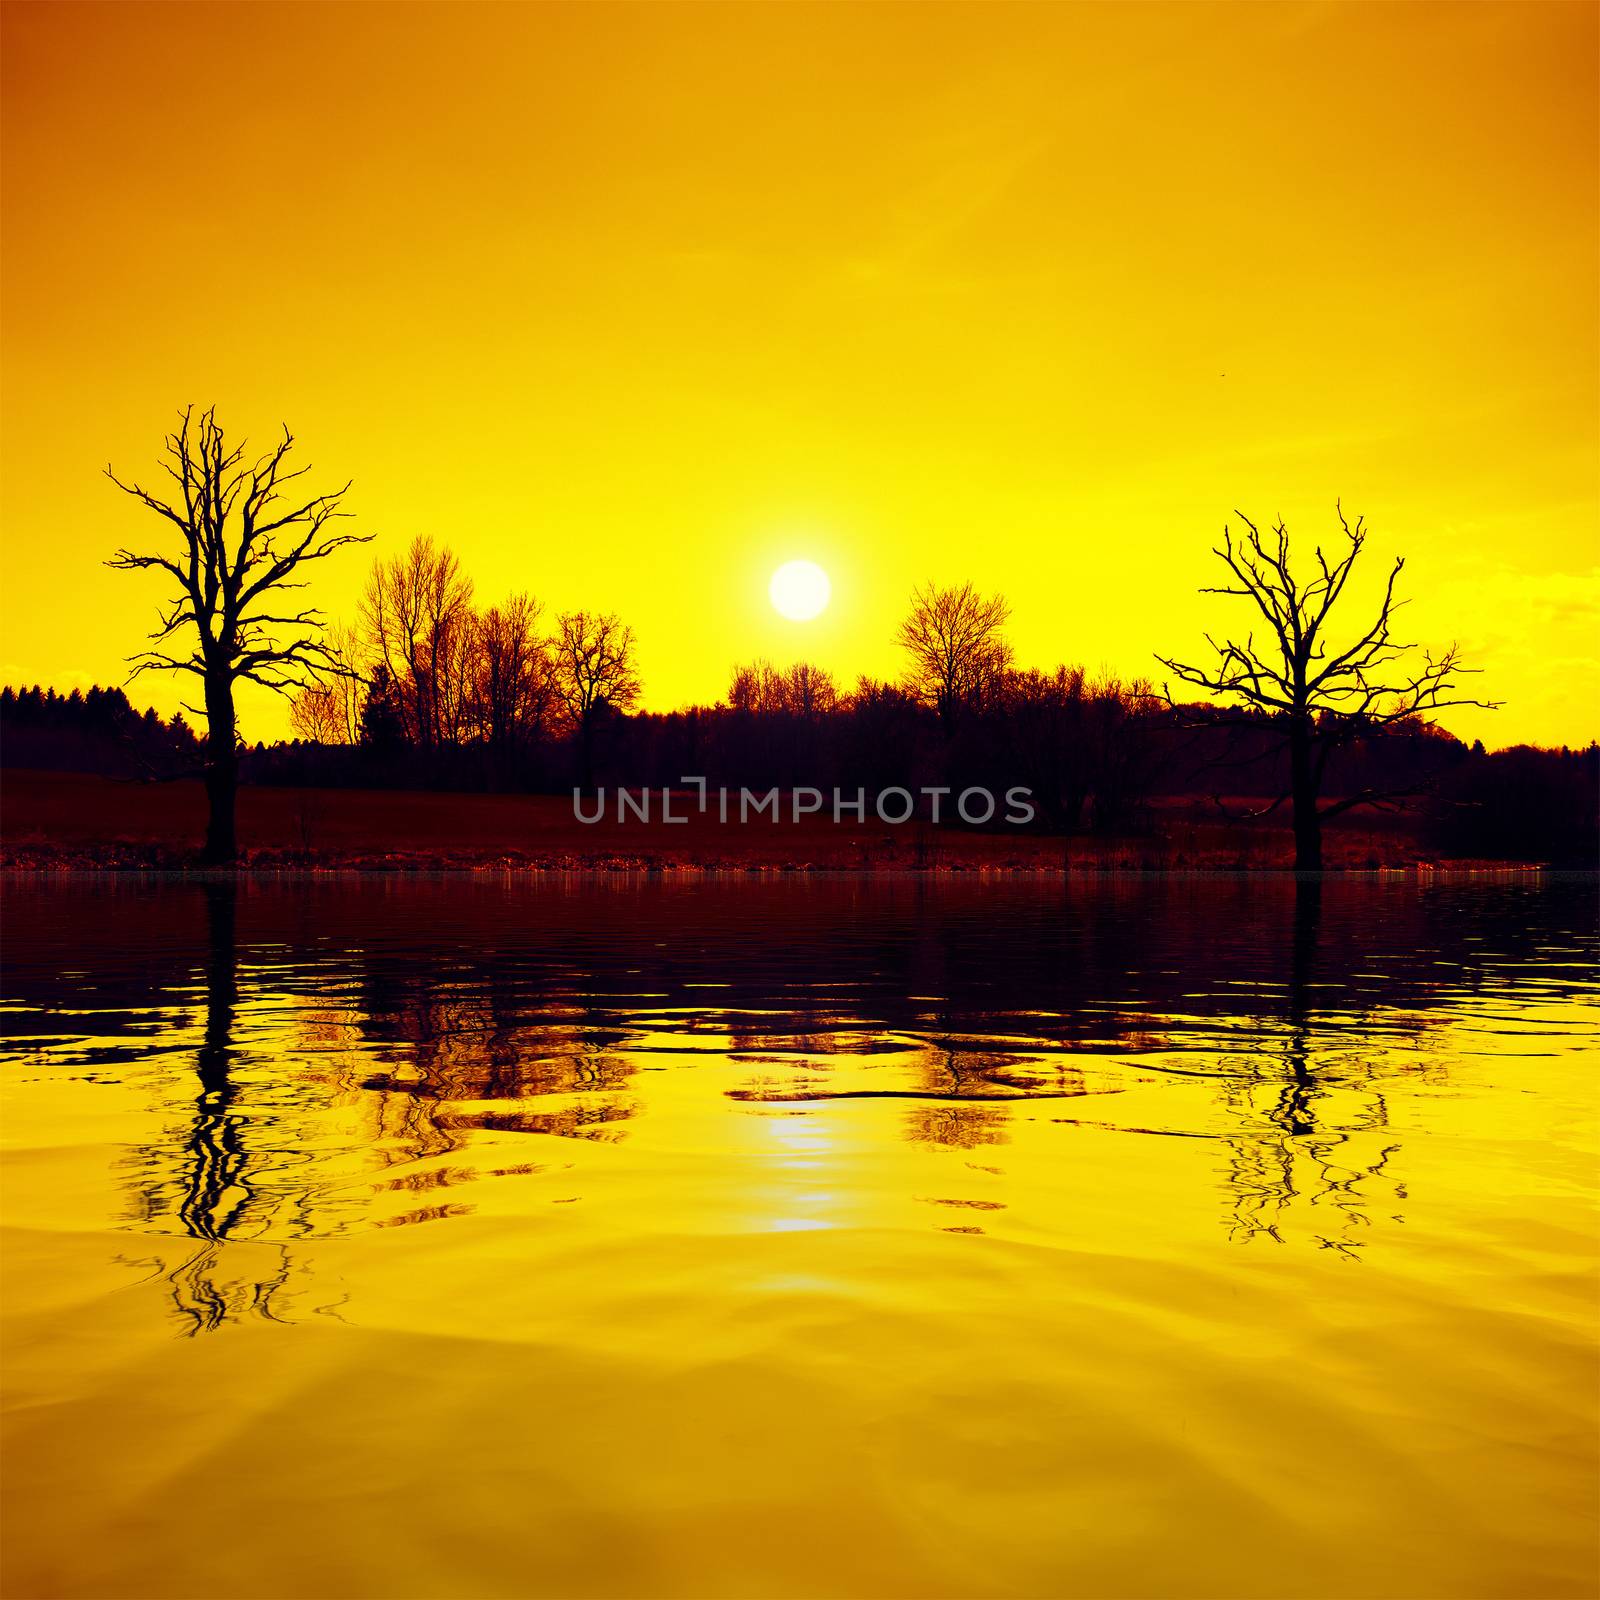 An image of a sunset scenery lake and trees